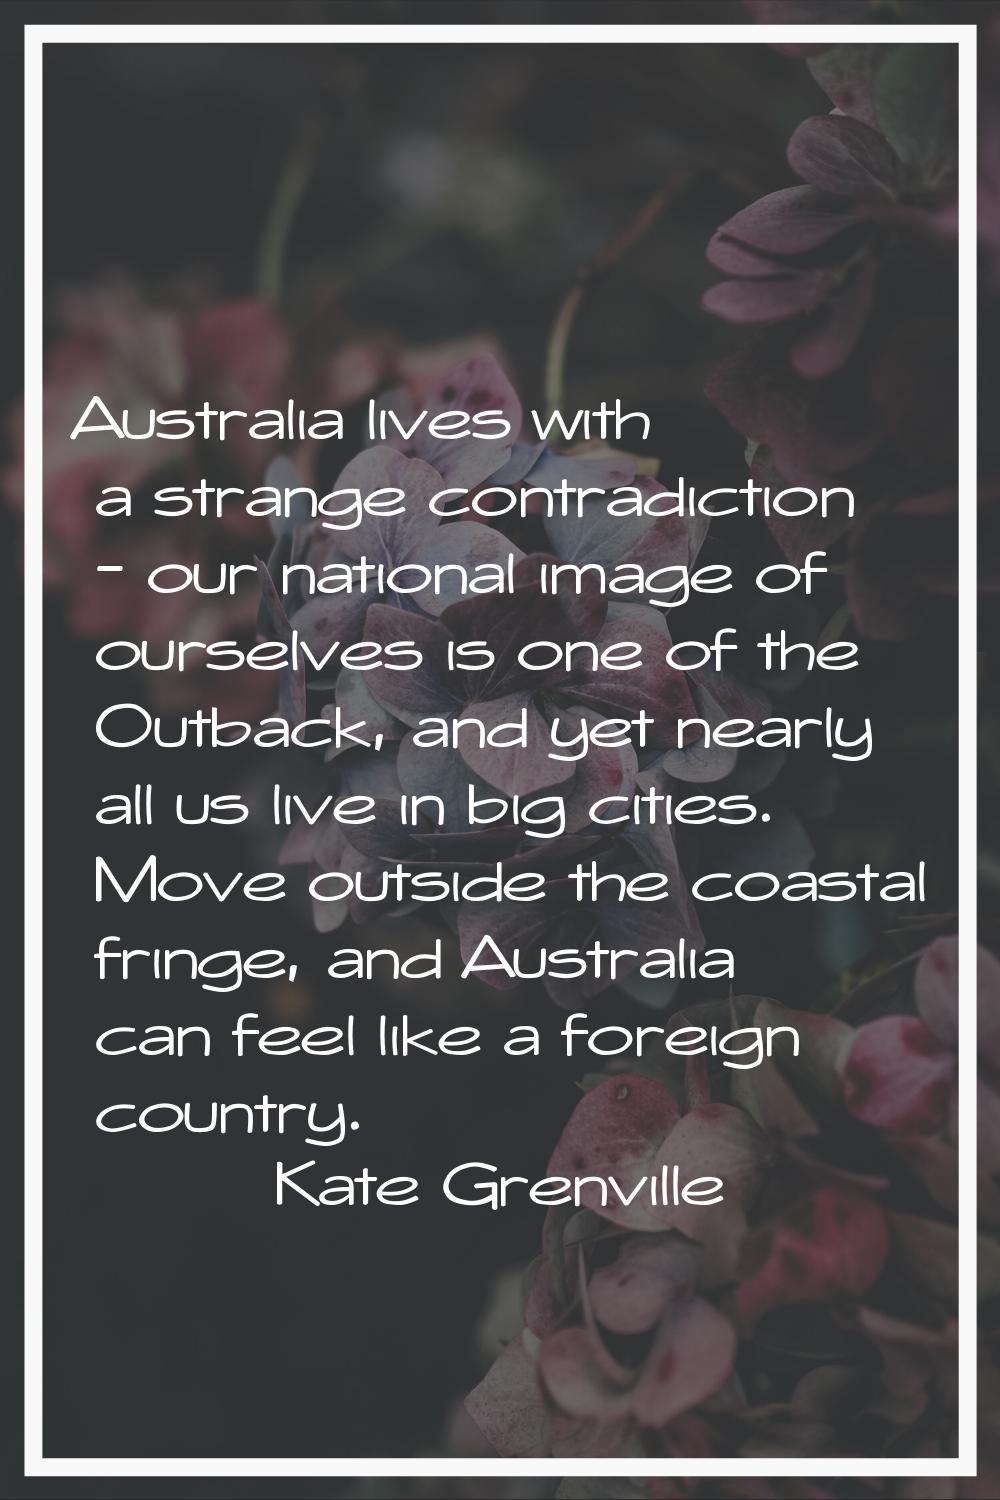 Australia lives with a strange contradiction - our national image of ourselves is one of the Outbac